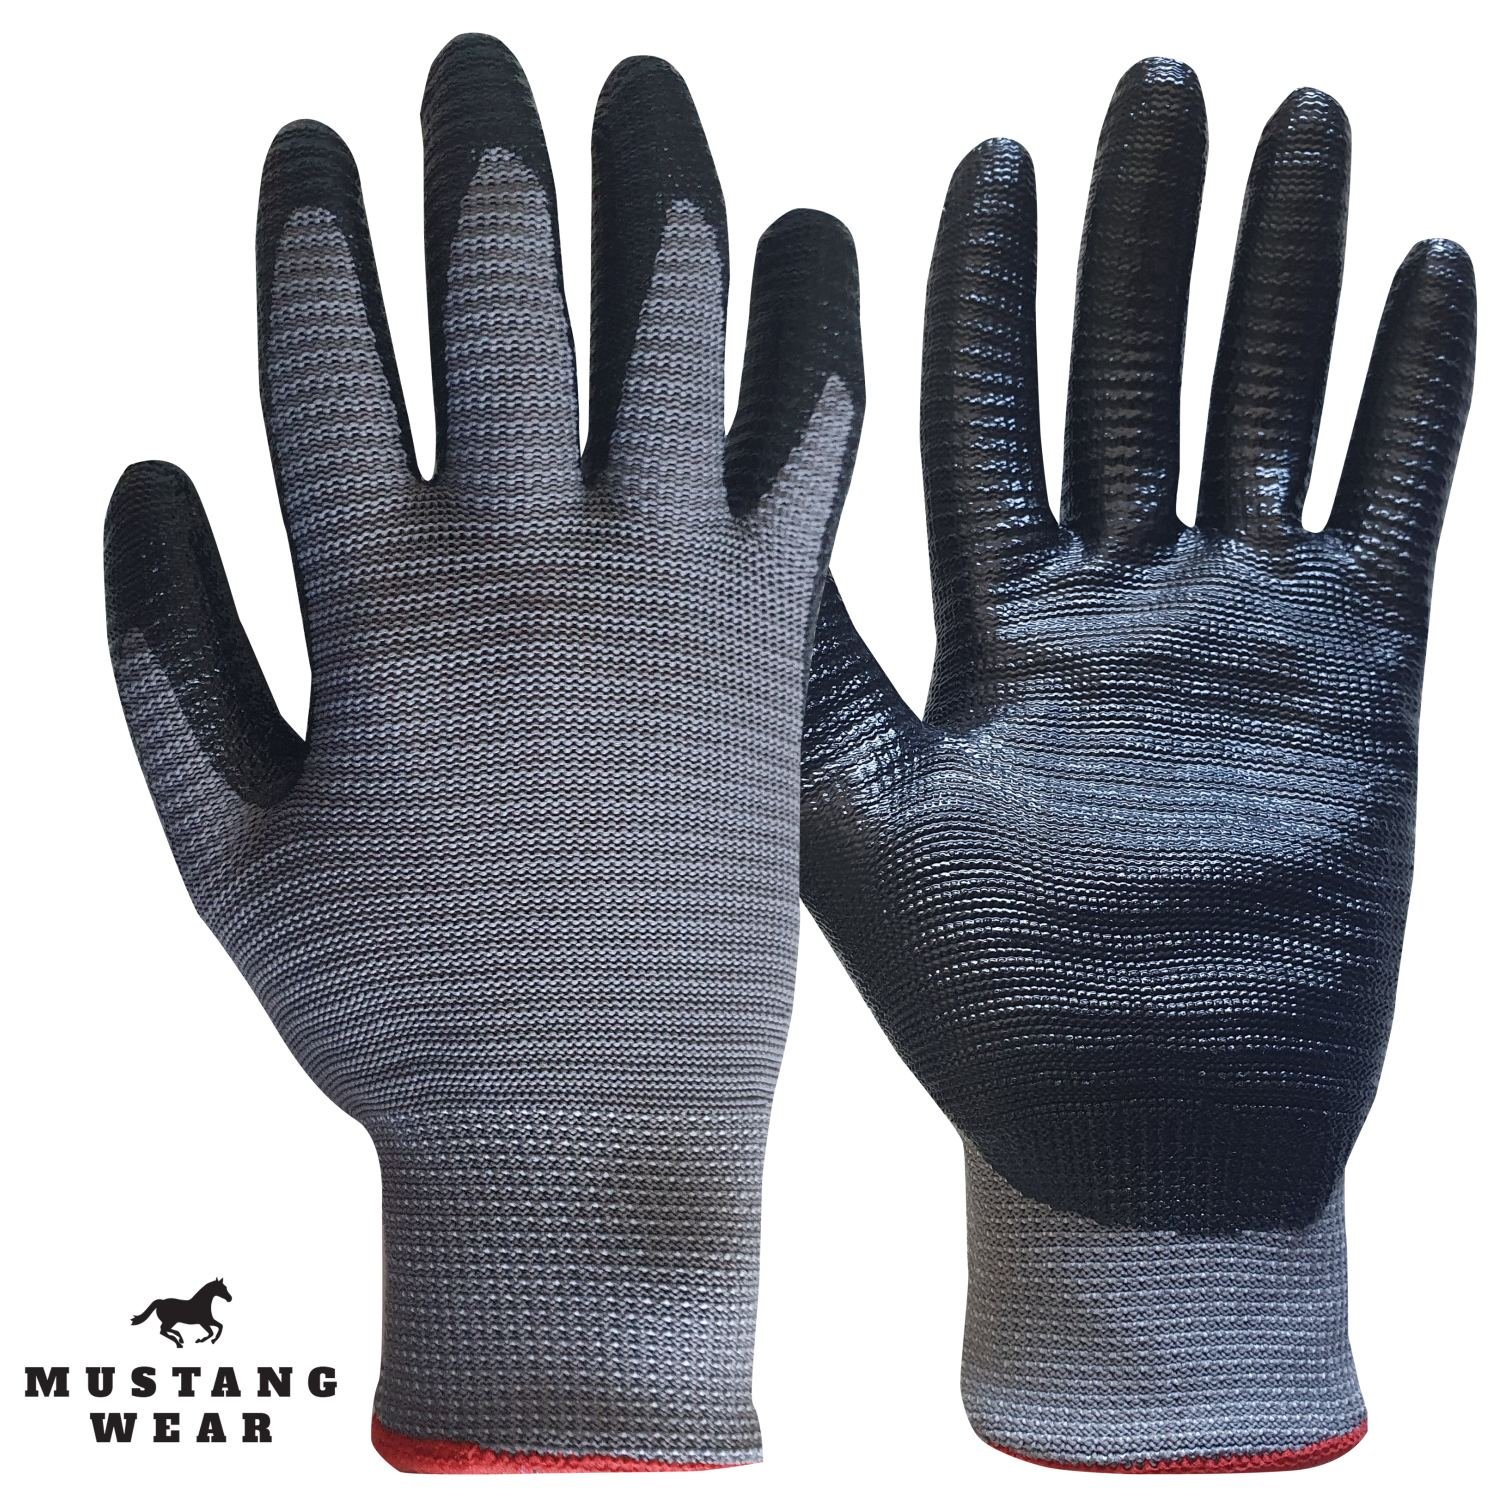 Mustang Wear SuperGrip Corrugated Nitrile Palm Glove (Pkt 12)